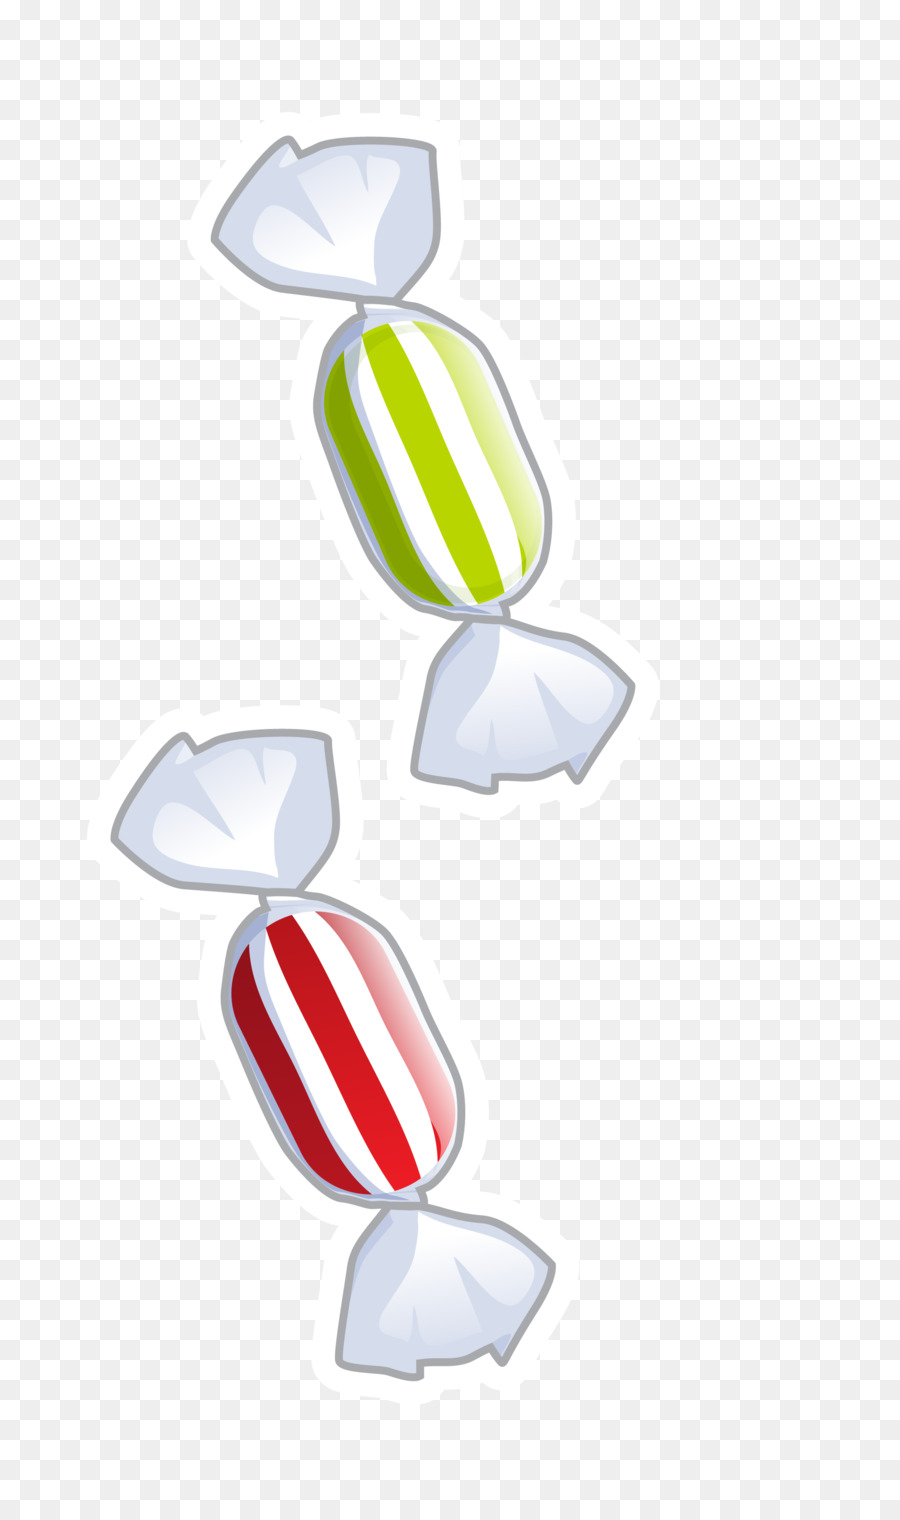 Candy Clip art - candy png download - 1913*3200 - Free Transparent Candy png Download.